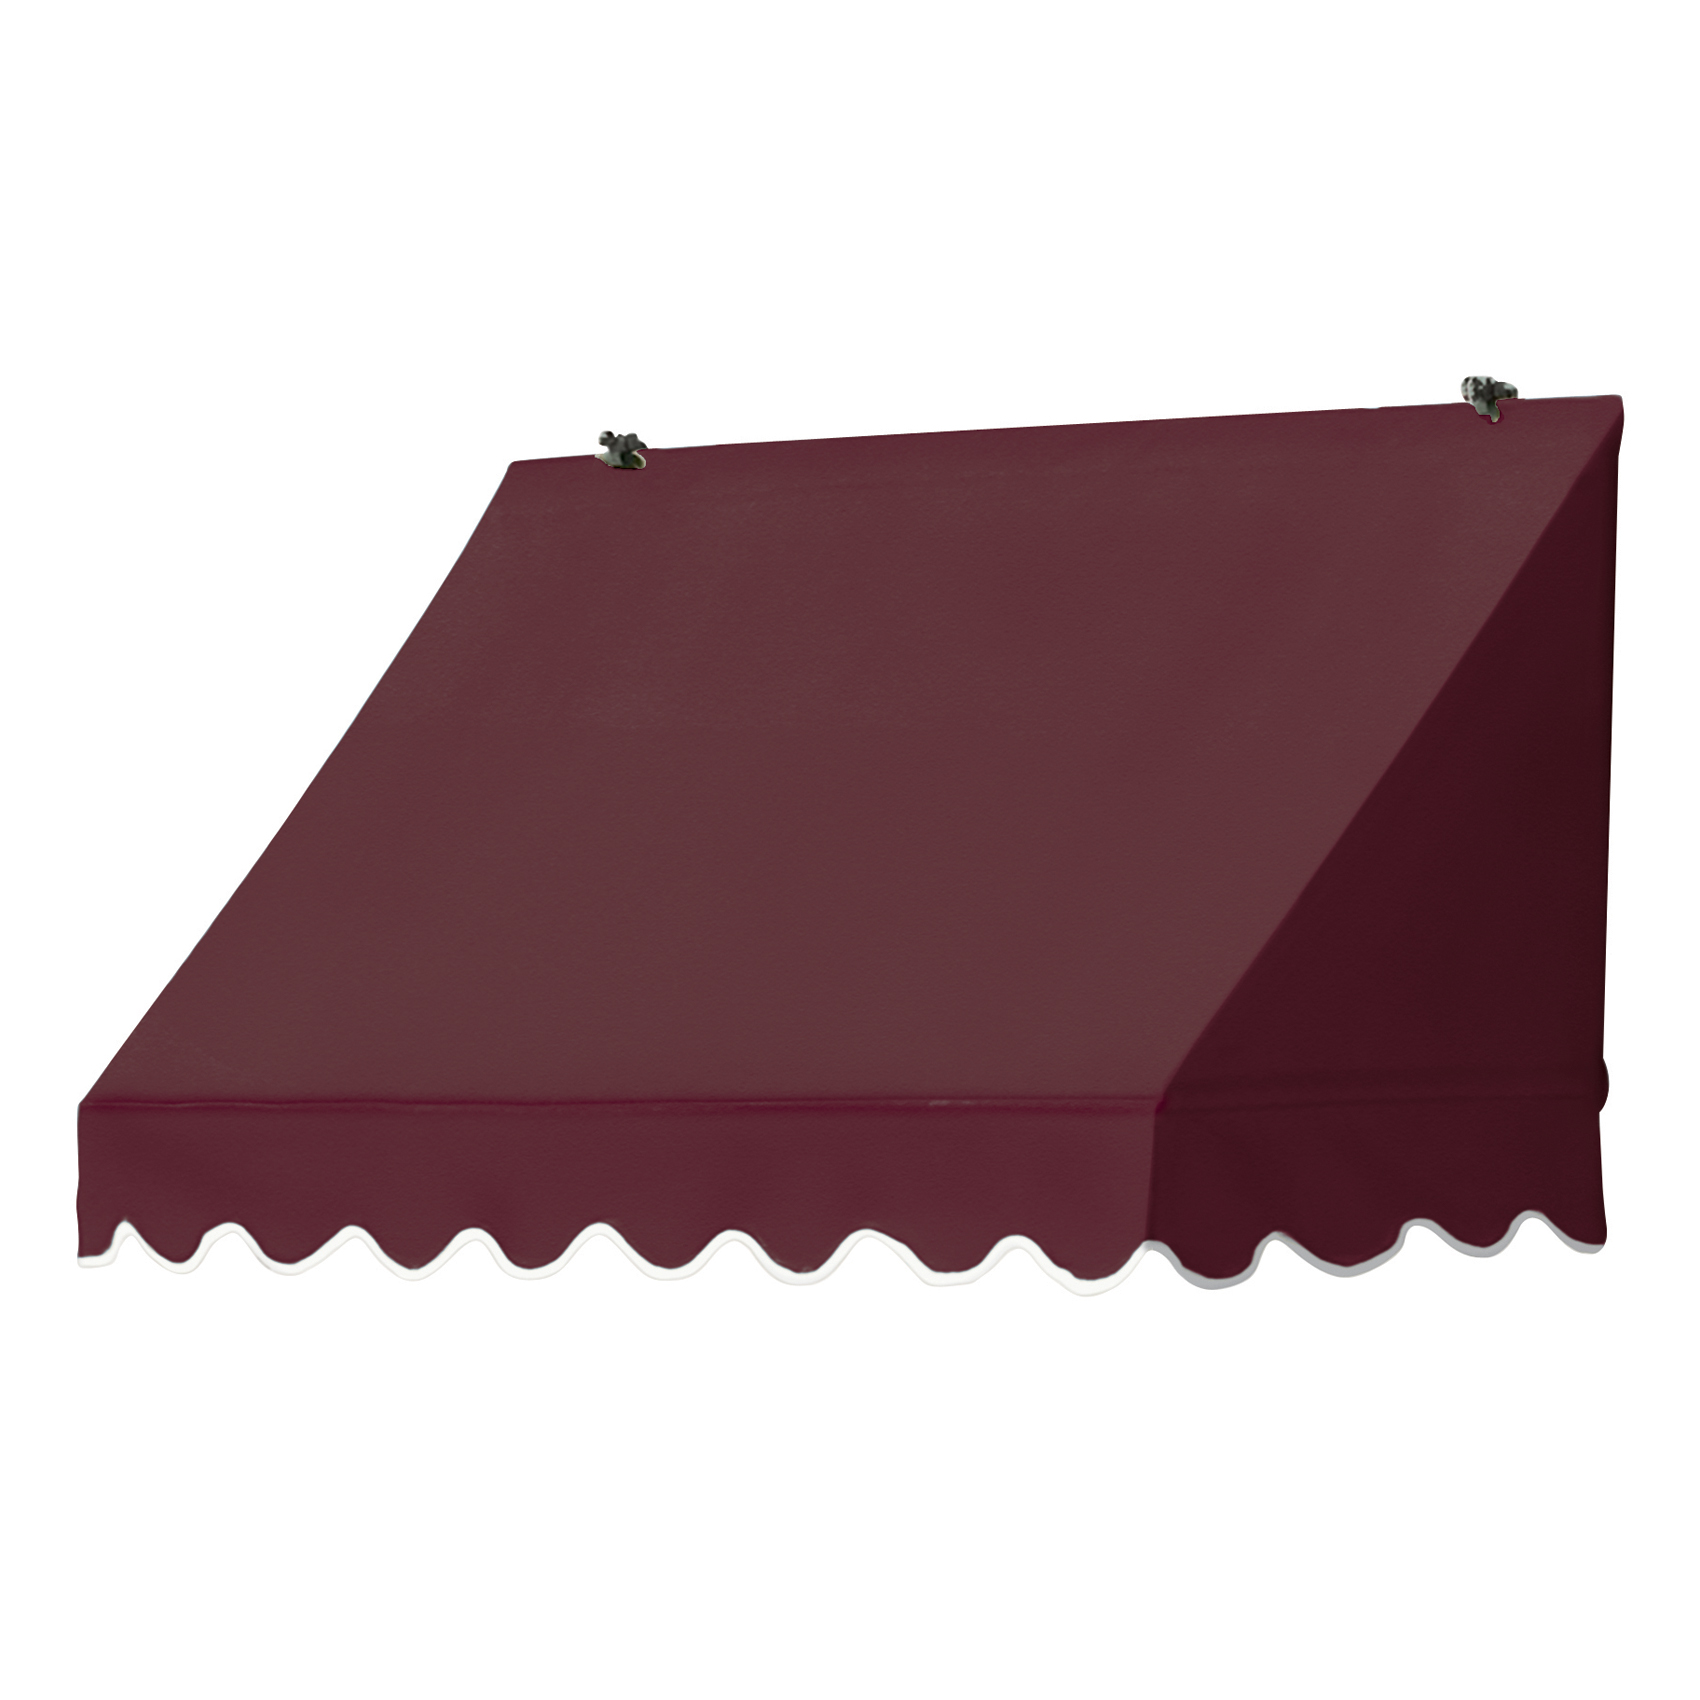 Awnings in a Box&reg; 4' Traditional Style in Assorted Colors